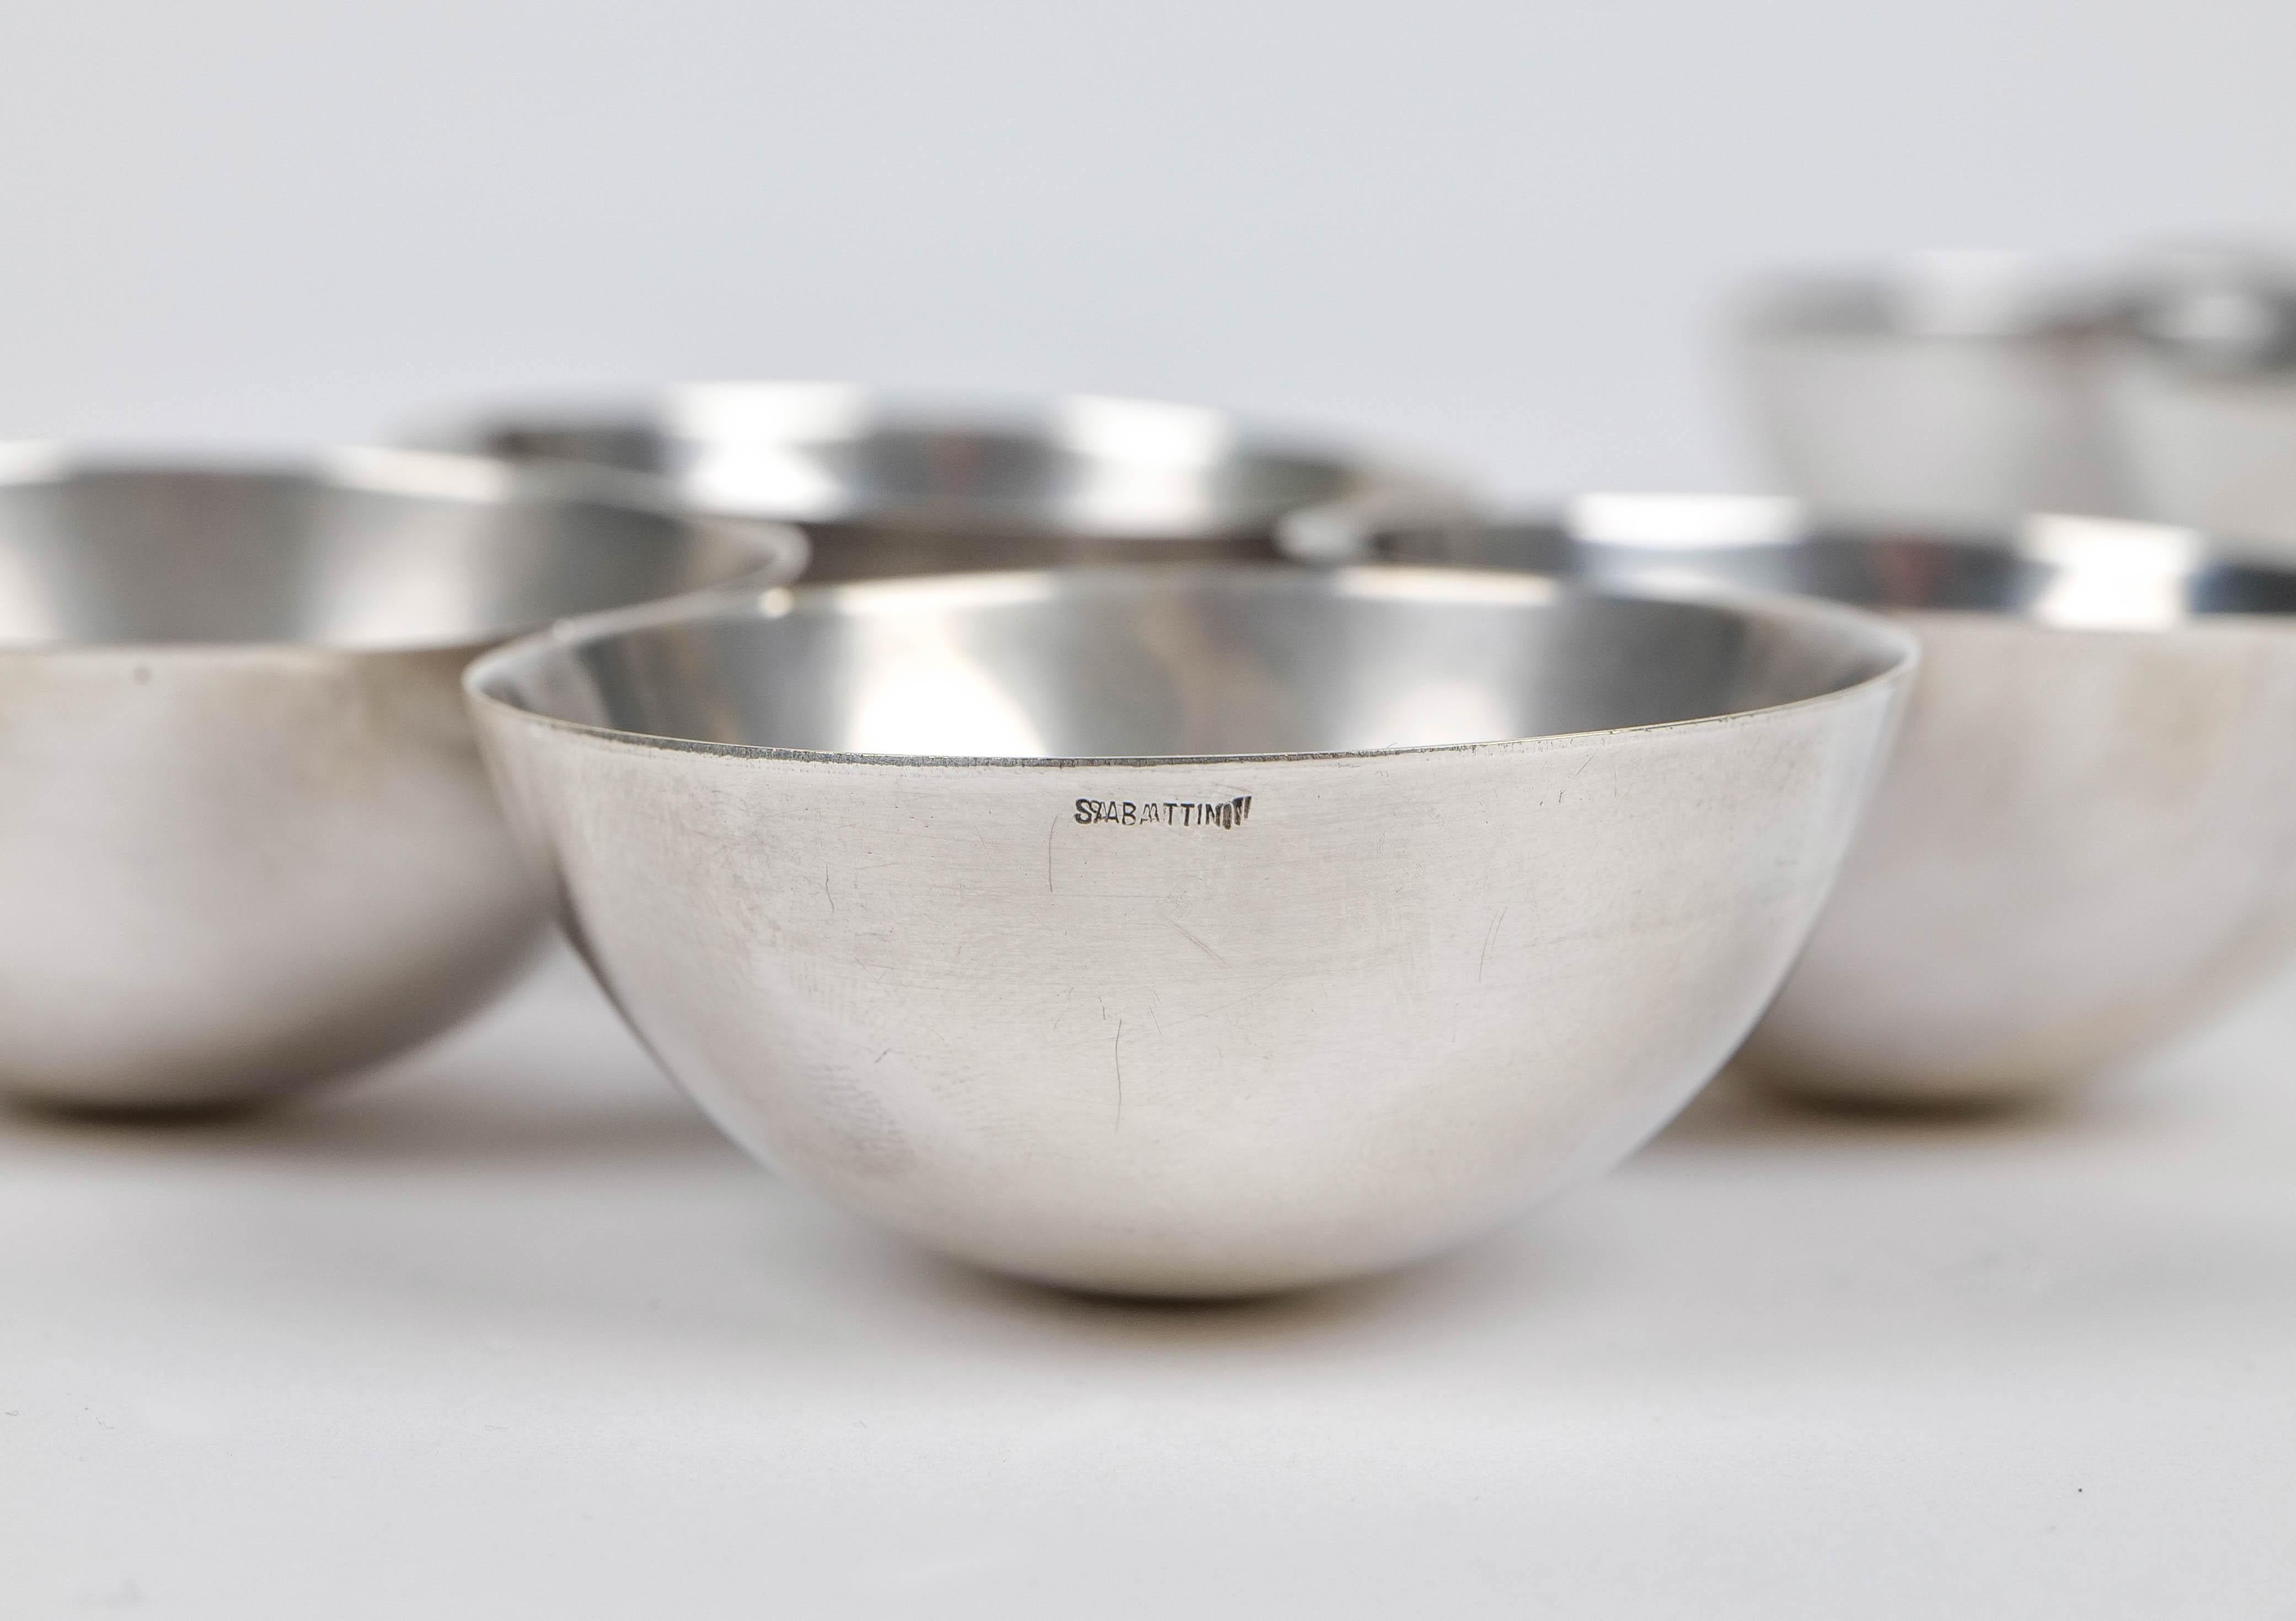 Pair of Bowls Silver Metal by Lino Sabattini, Italy 1970s For Sale 3